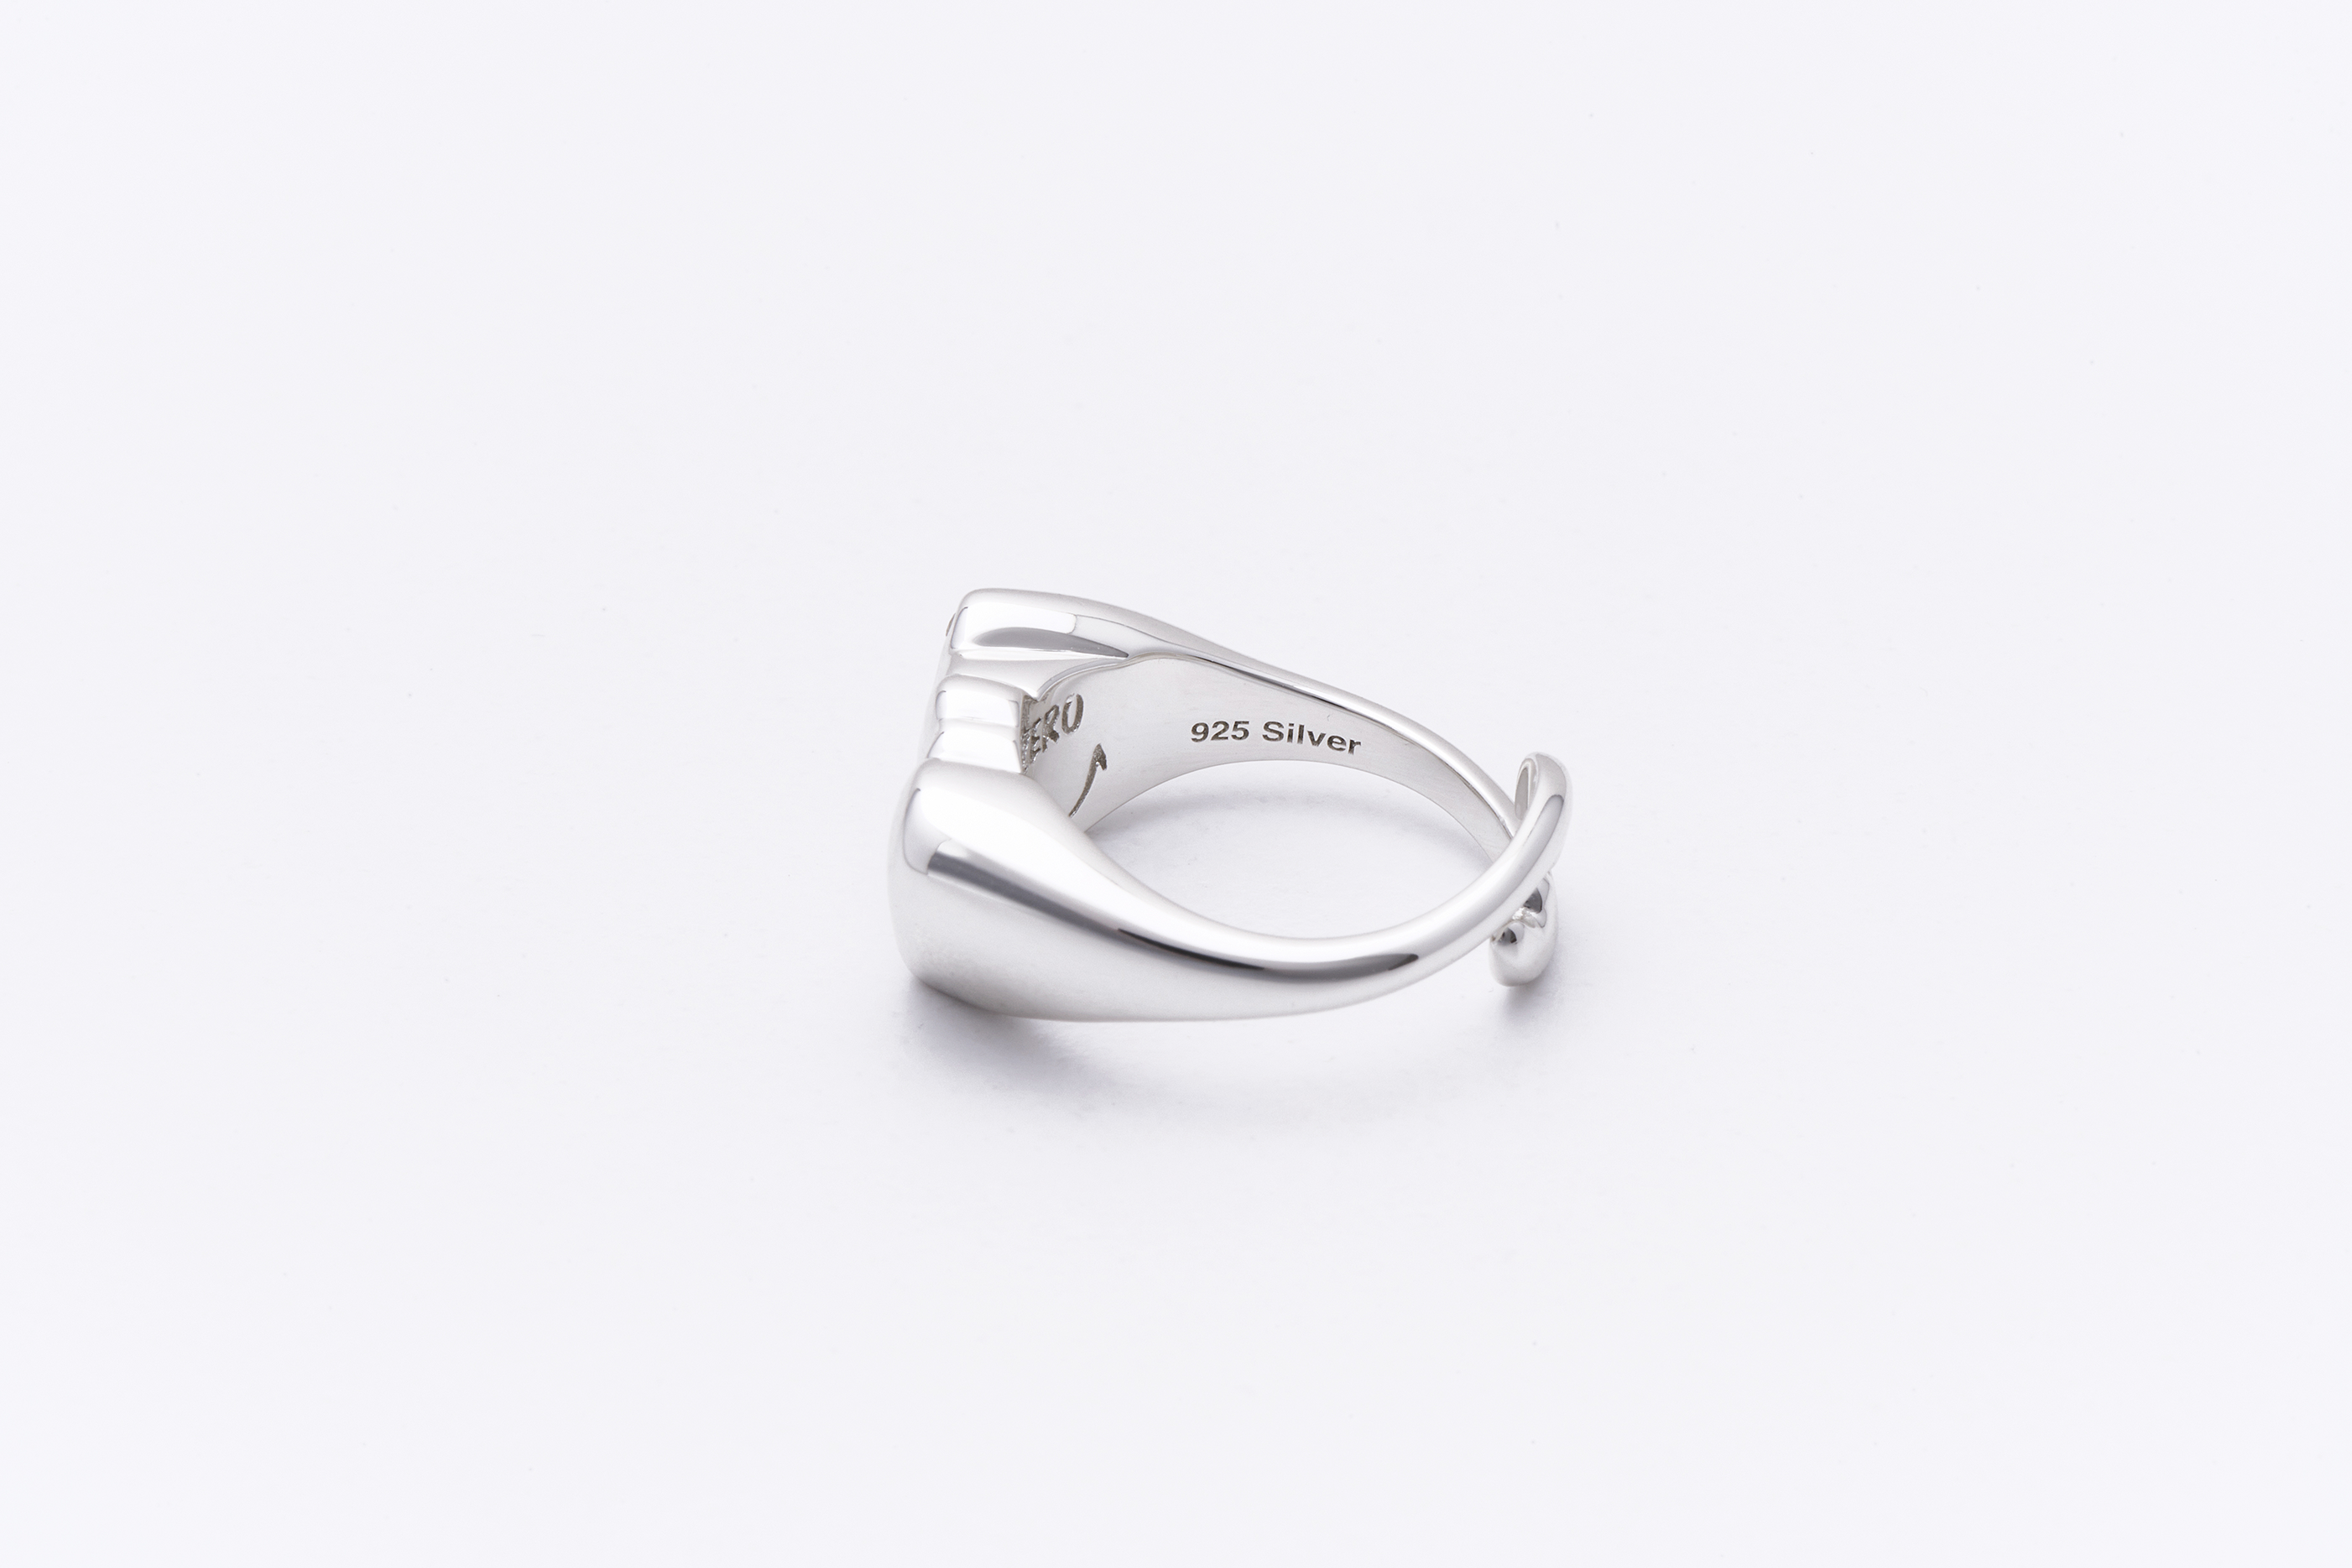 'TO HUG SOMEONE I LOVE' Silver Ring